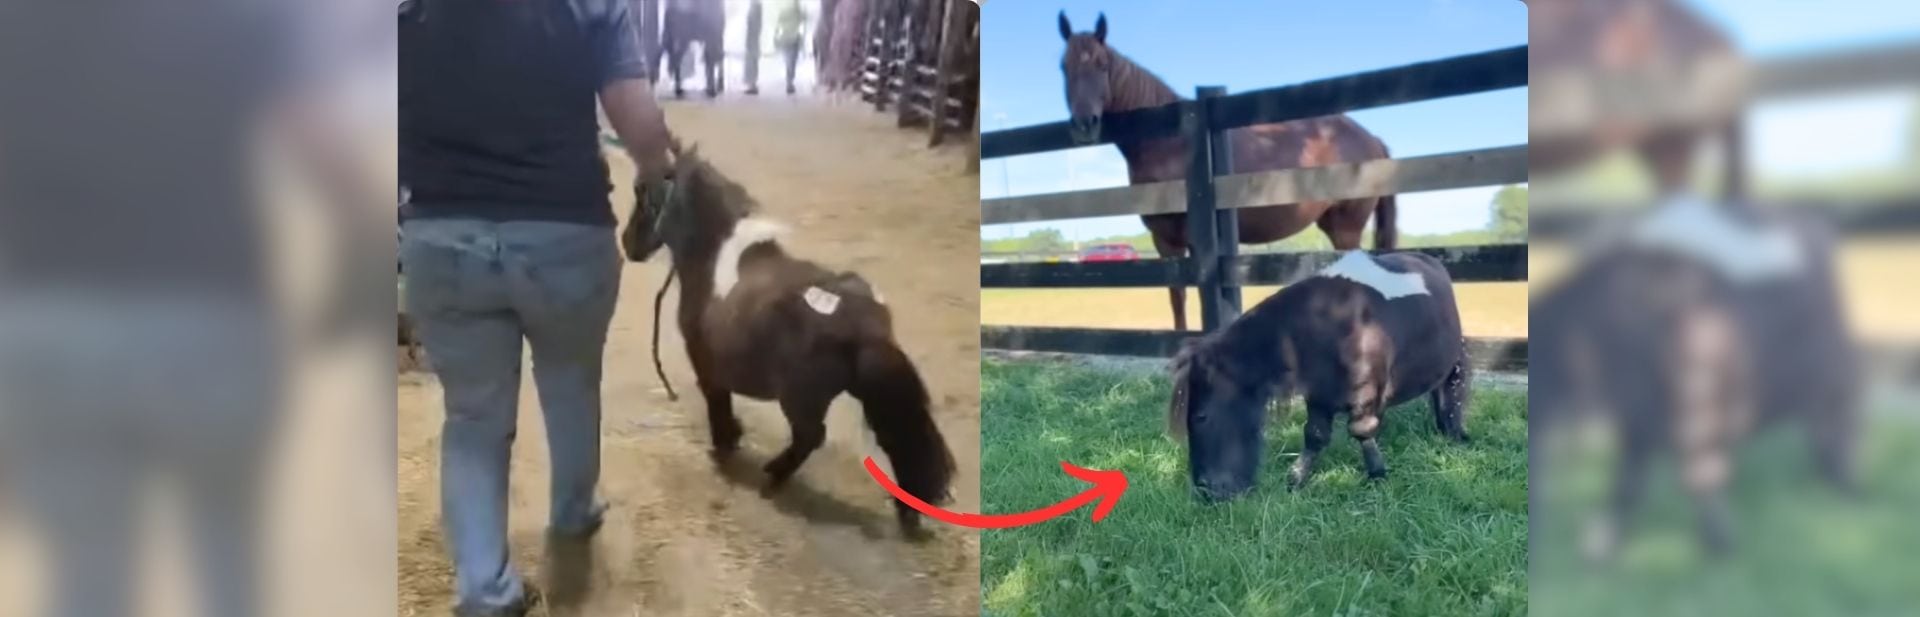 Tiny Horse Overcomes Big Odds to Find Joy in a Pasture Full of Friends